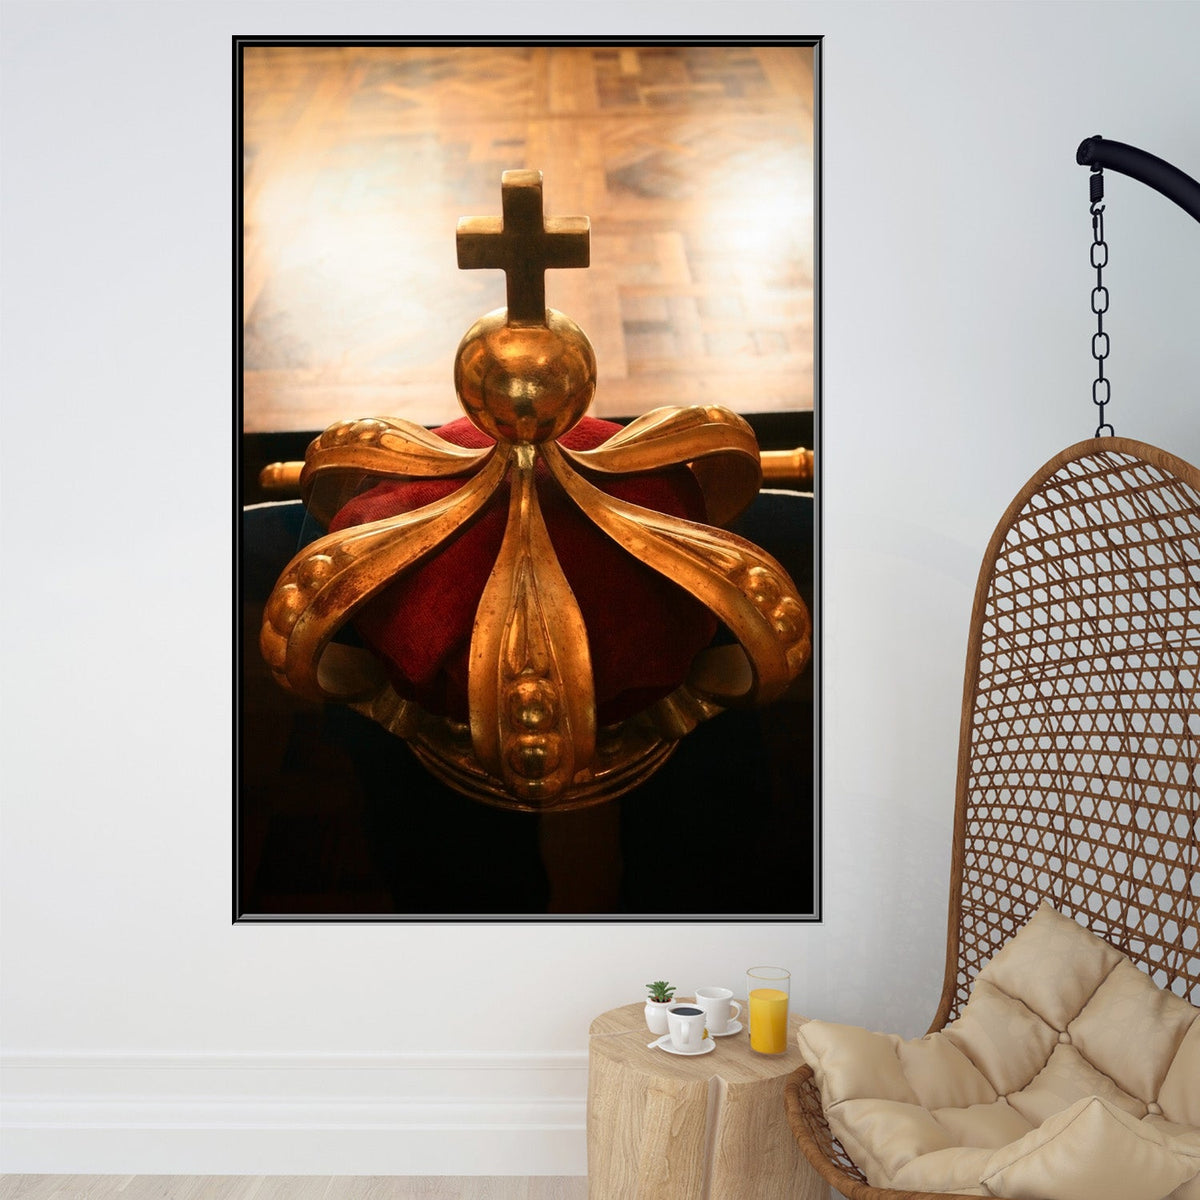 https://cdn.shopify.com/s/files/1/0387/9986/8044/products/TheCrucifixandCrownCanvasArtprintFloatingFrame-1.jpg